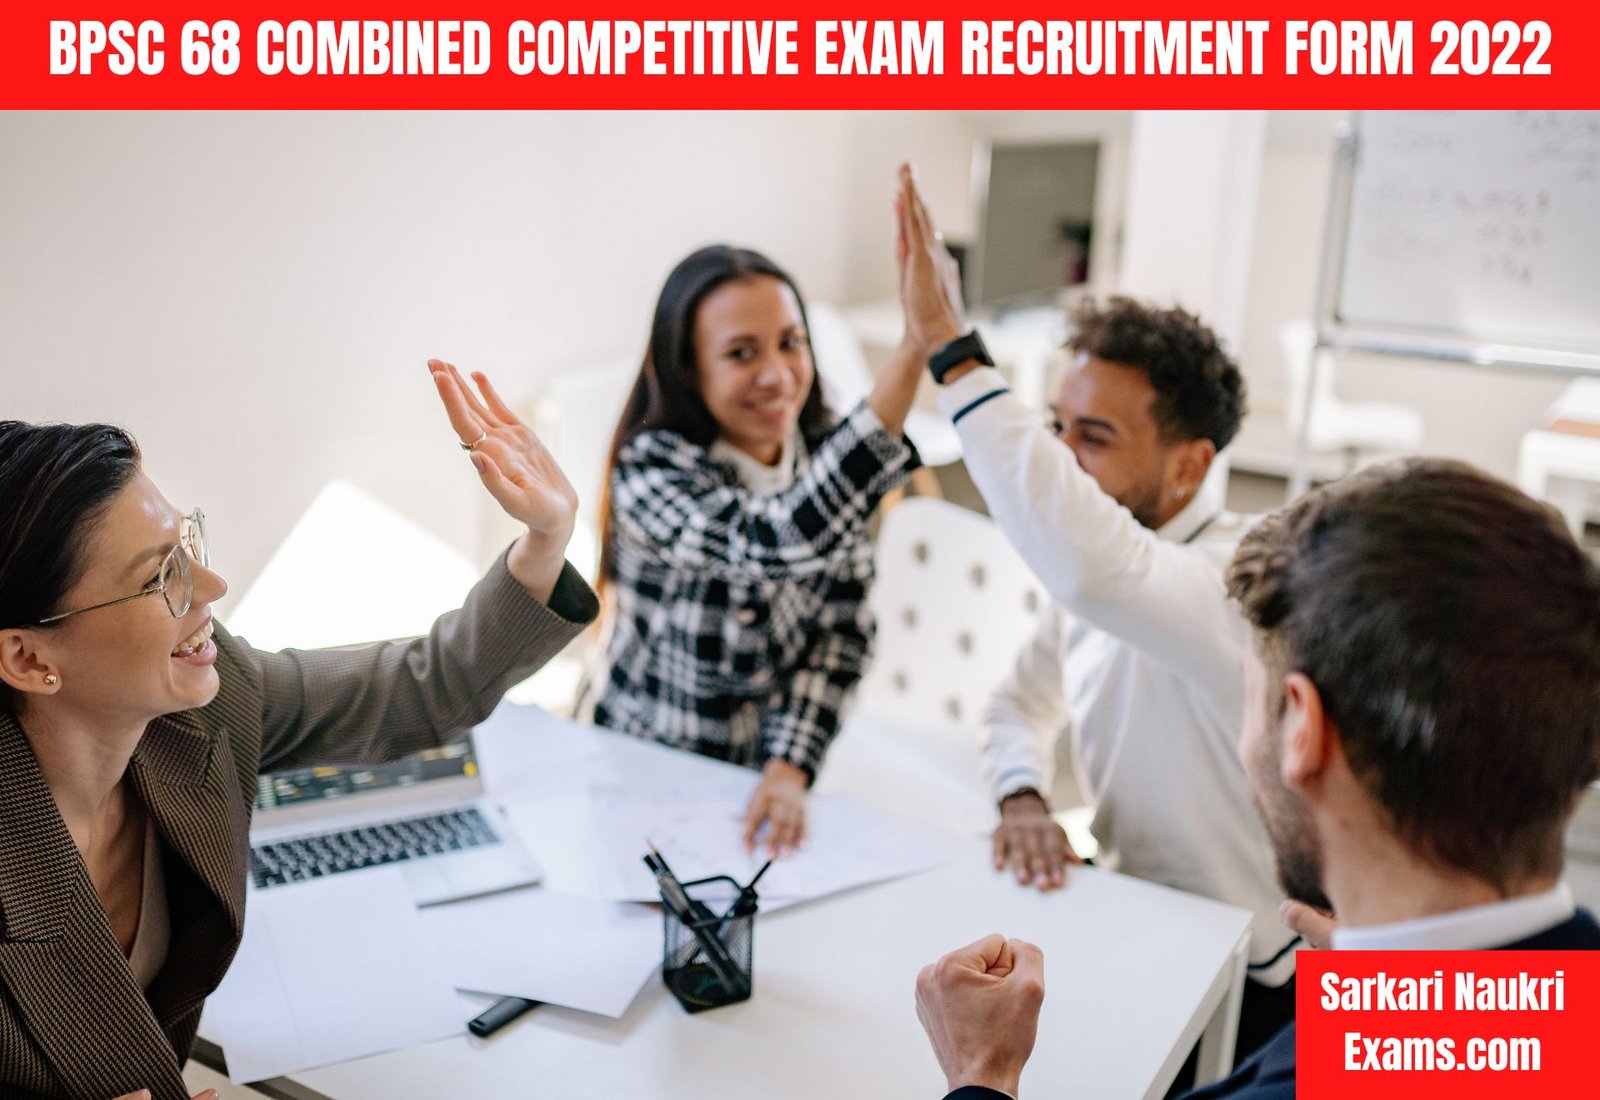 BPSC 68 Combined Competitive Exam Recruitment Form 2022 | Last Date 20 December 2022